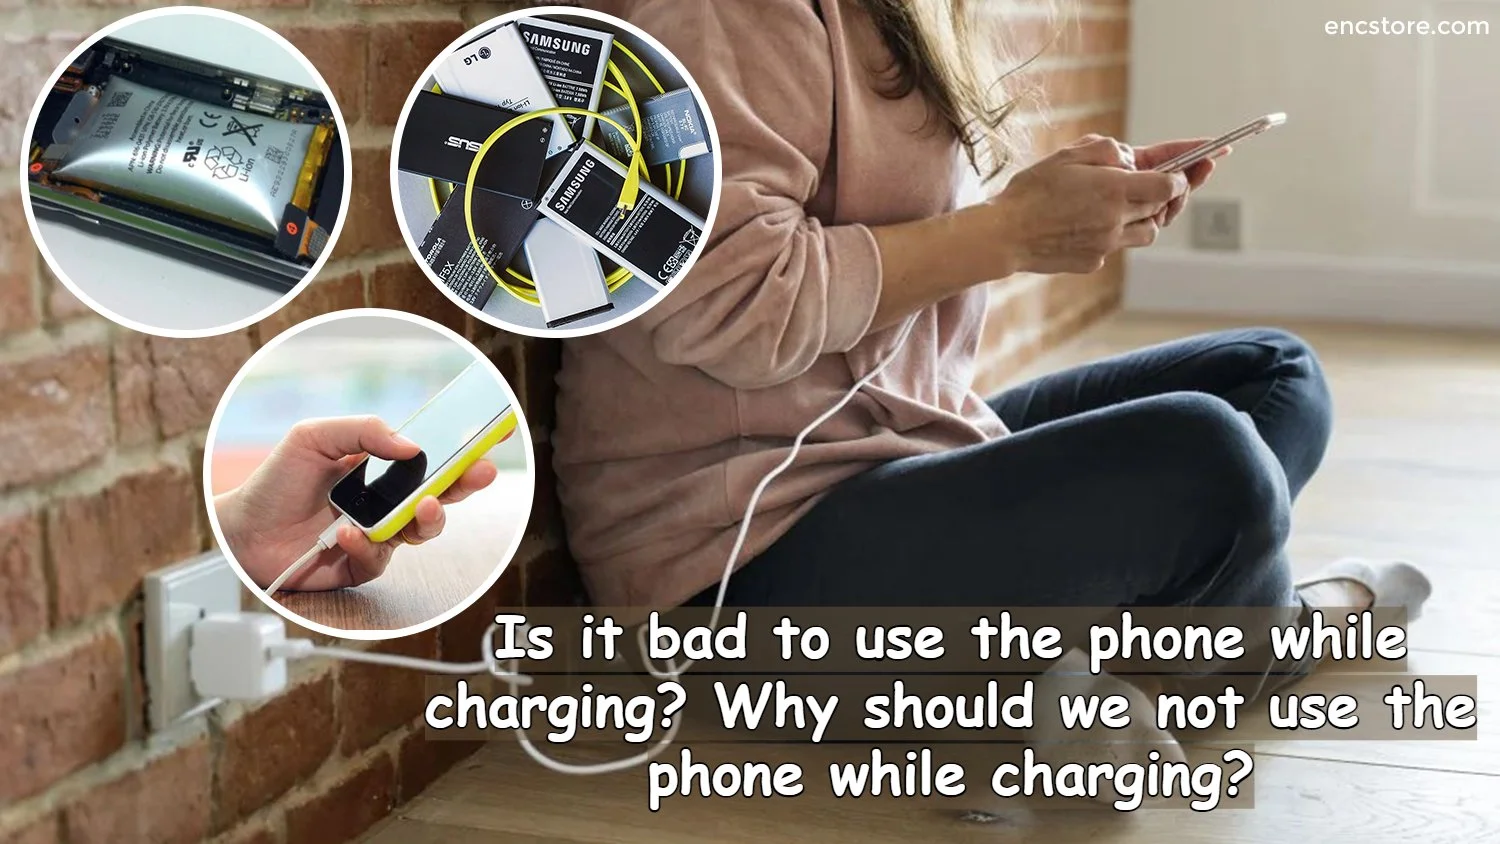 Is it bad to use the phone while charging? Why should we not use the phone while charging?